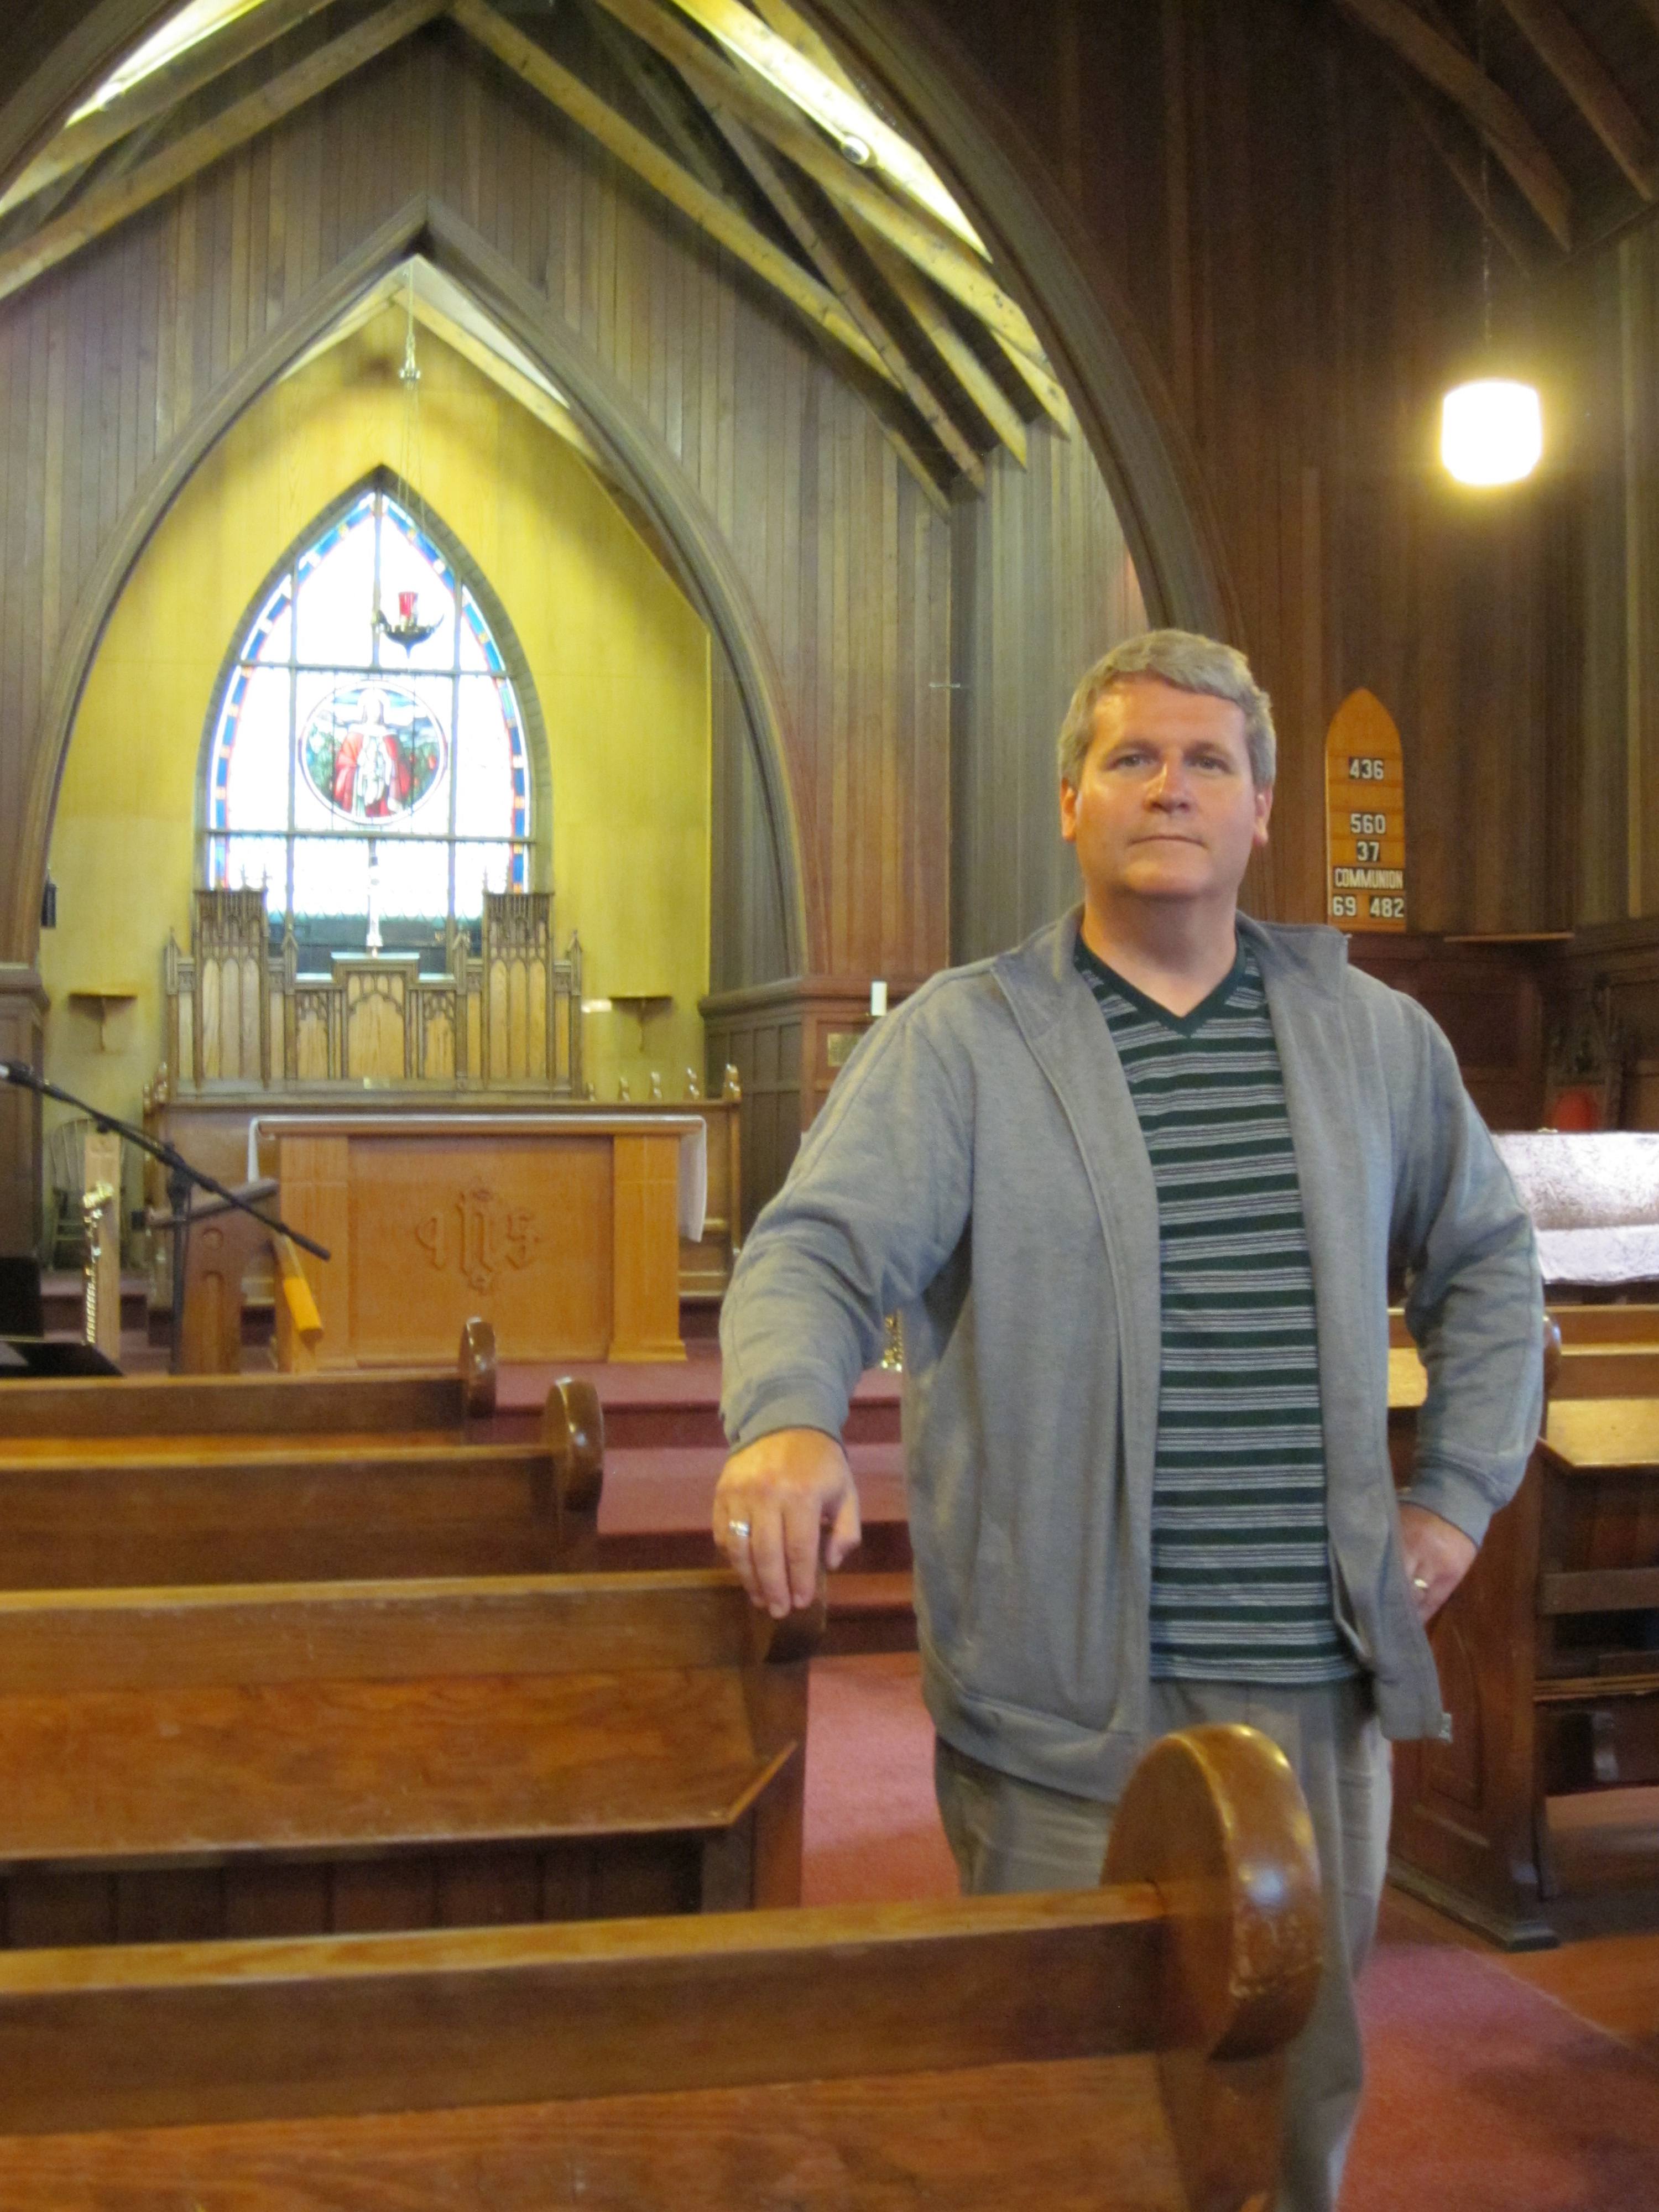 COMMUNITY SUPPORT – Rev. Noel Wygiera of St. Luke’s Anglican Church is hoping the community can lend a hand in raising funds for ongoing restorative work to the church